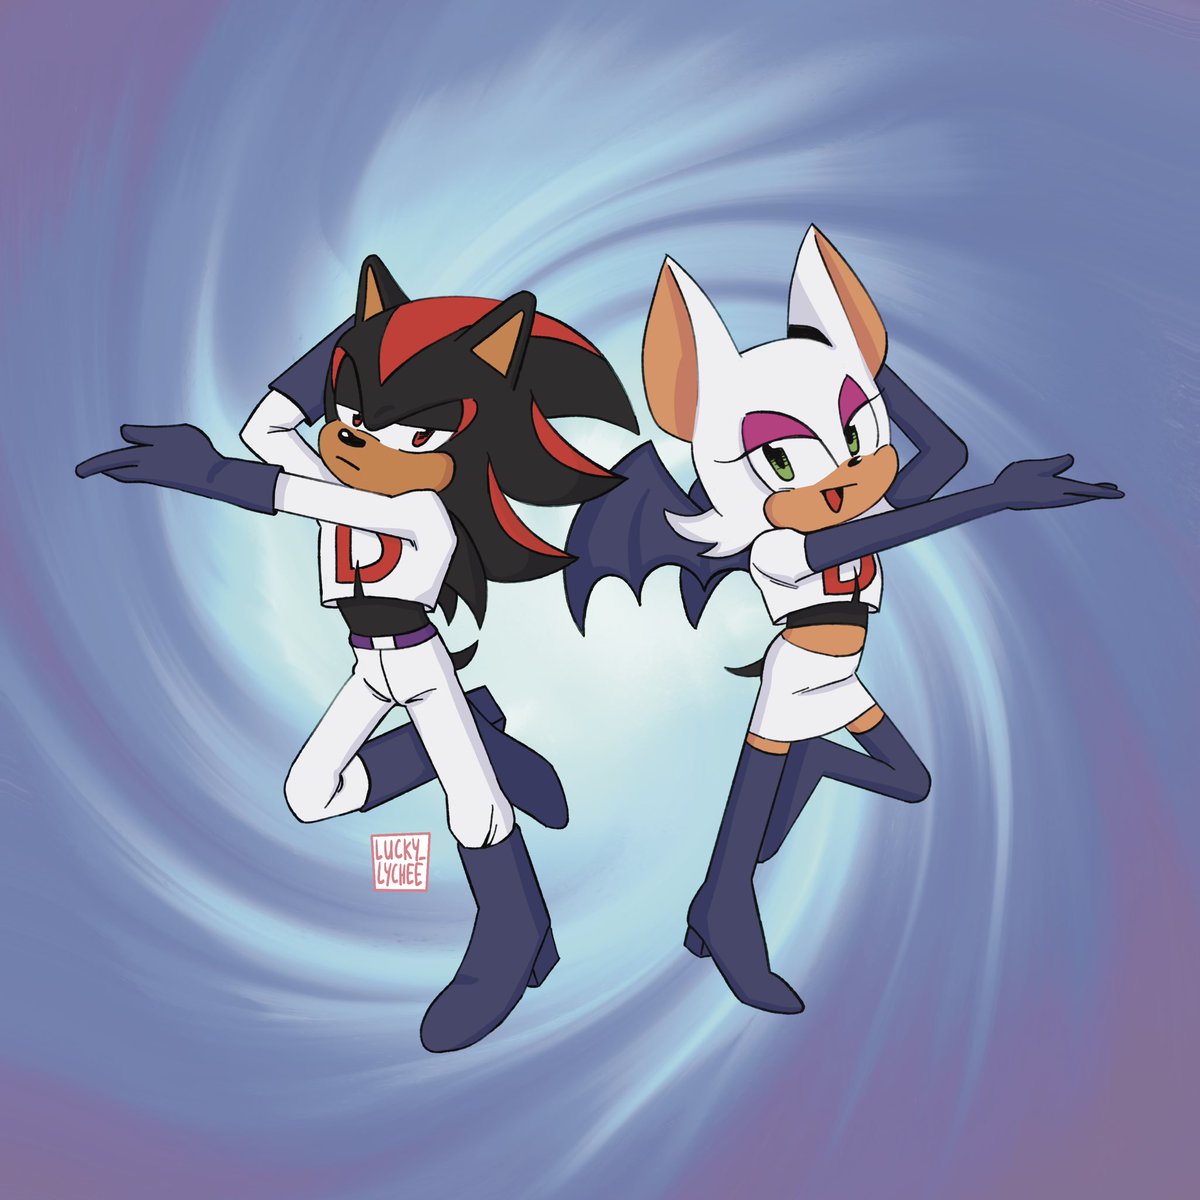 ℌ𝔦𝔪𝔦𝔱𝔰𝔲 (COMMS OPEN) on X: Meme reference Spoilers for Sonic Prime  Season 3 lol #sonadow #shadonic #sonic #shadow #sonicfanart #sonicprime  #tailsnine  / X